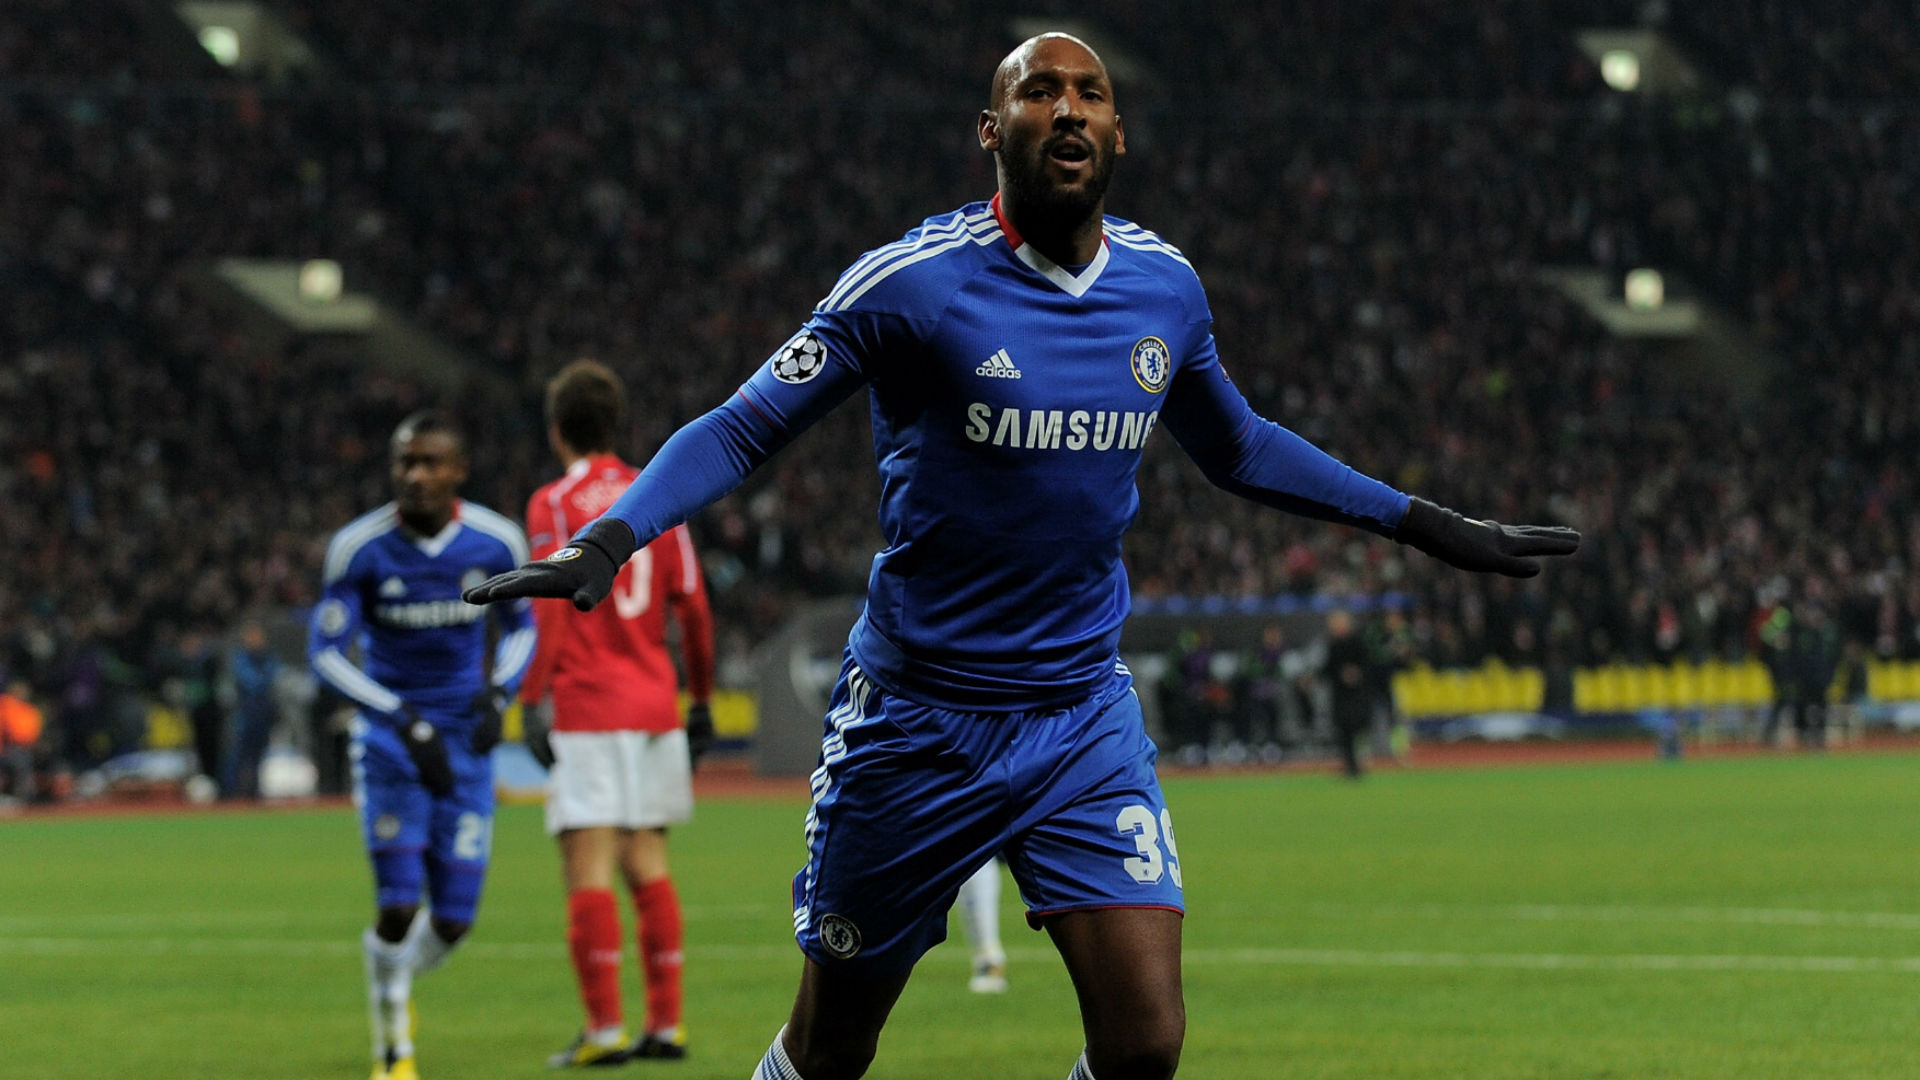 Nicolas Anelka Netflix documentary: How to watch, release date & full details